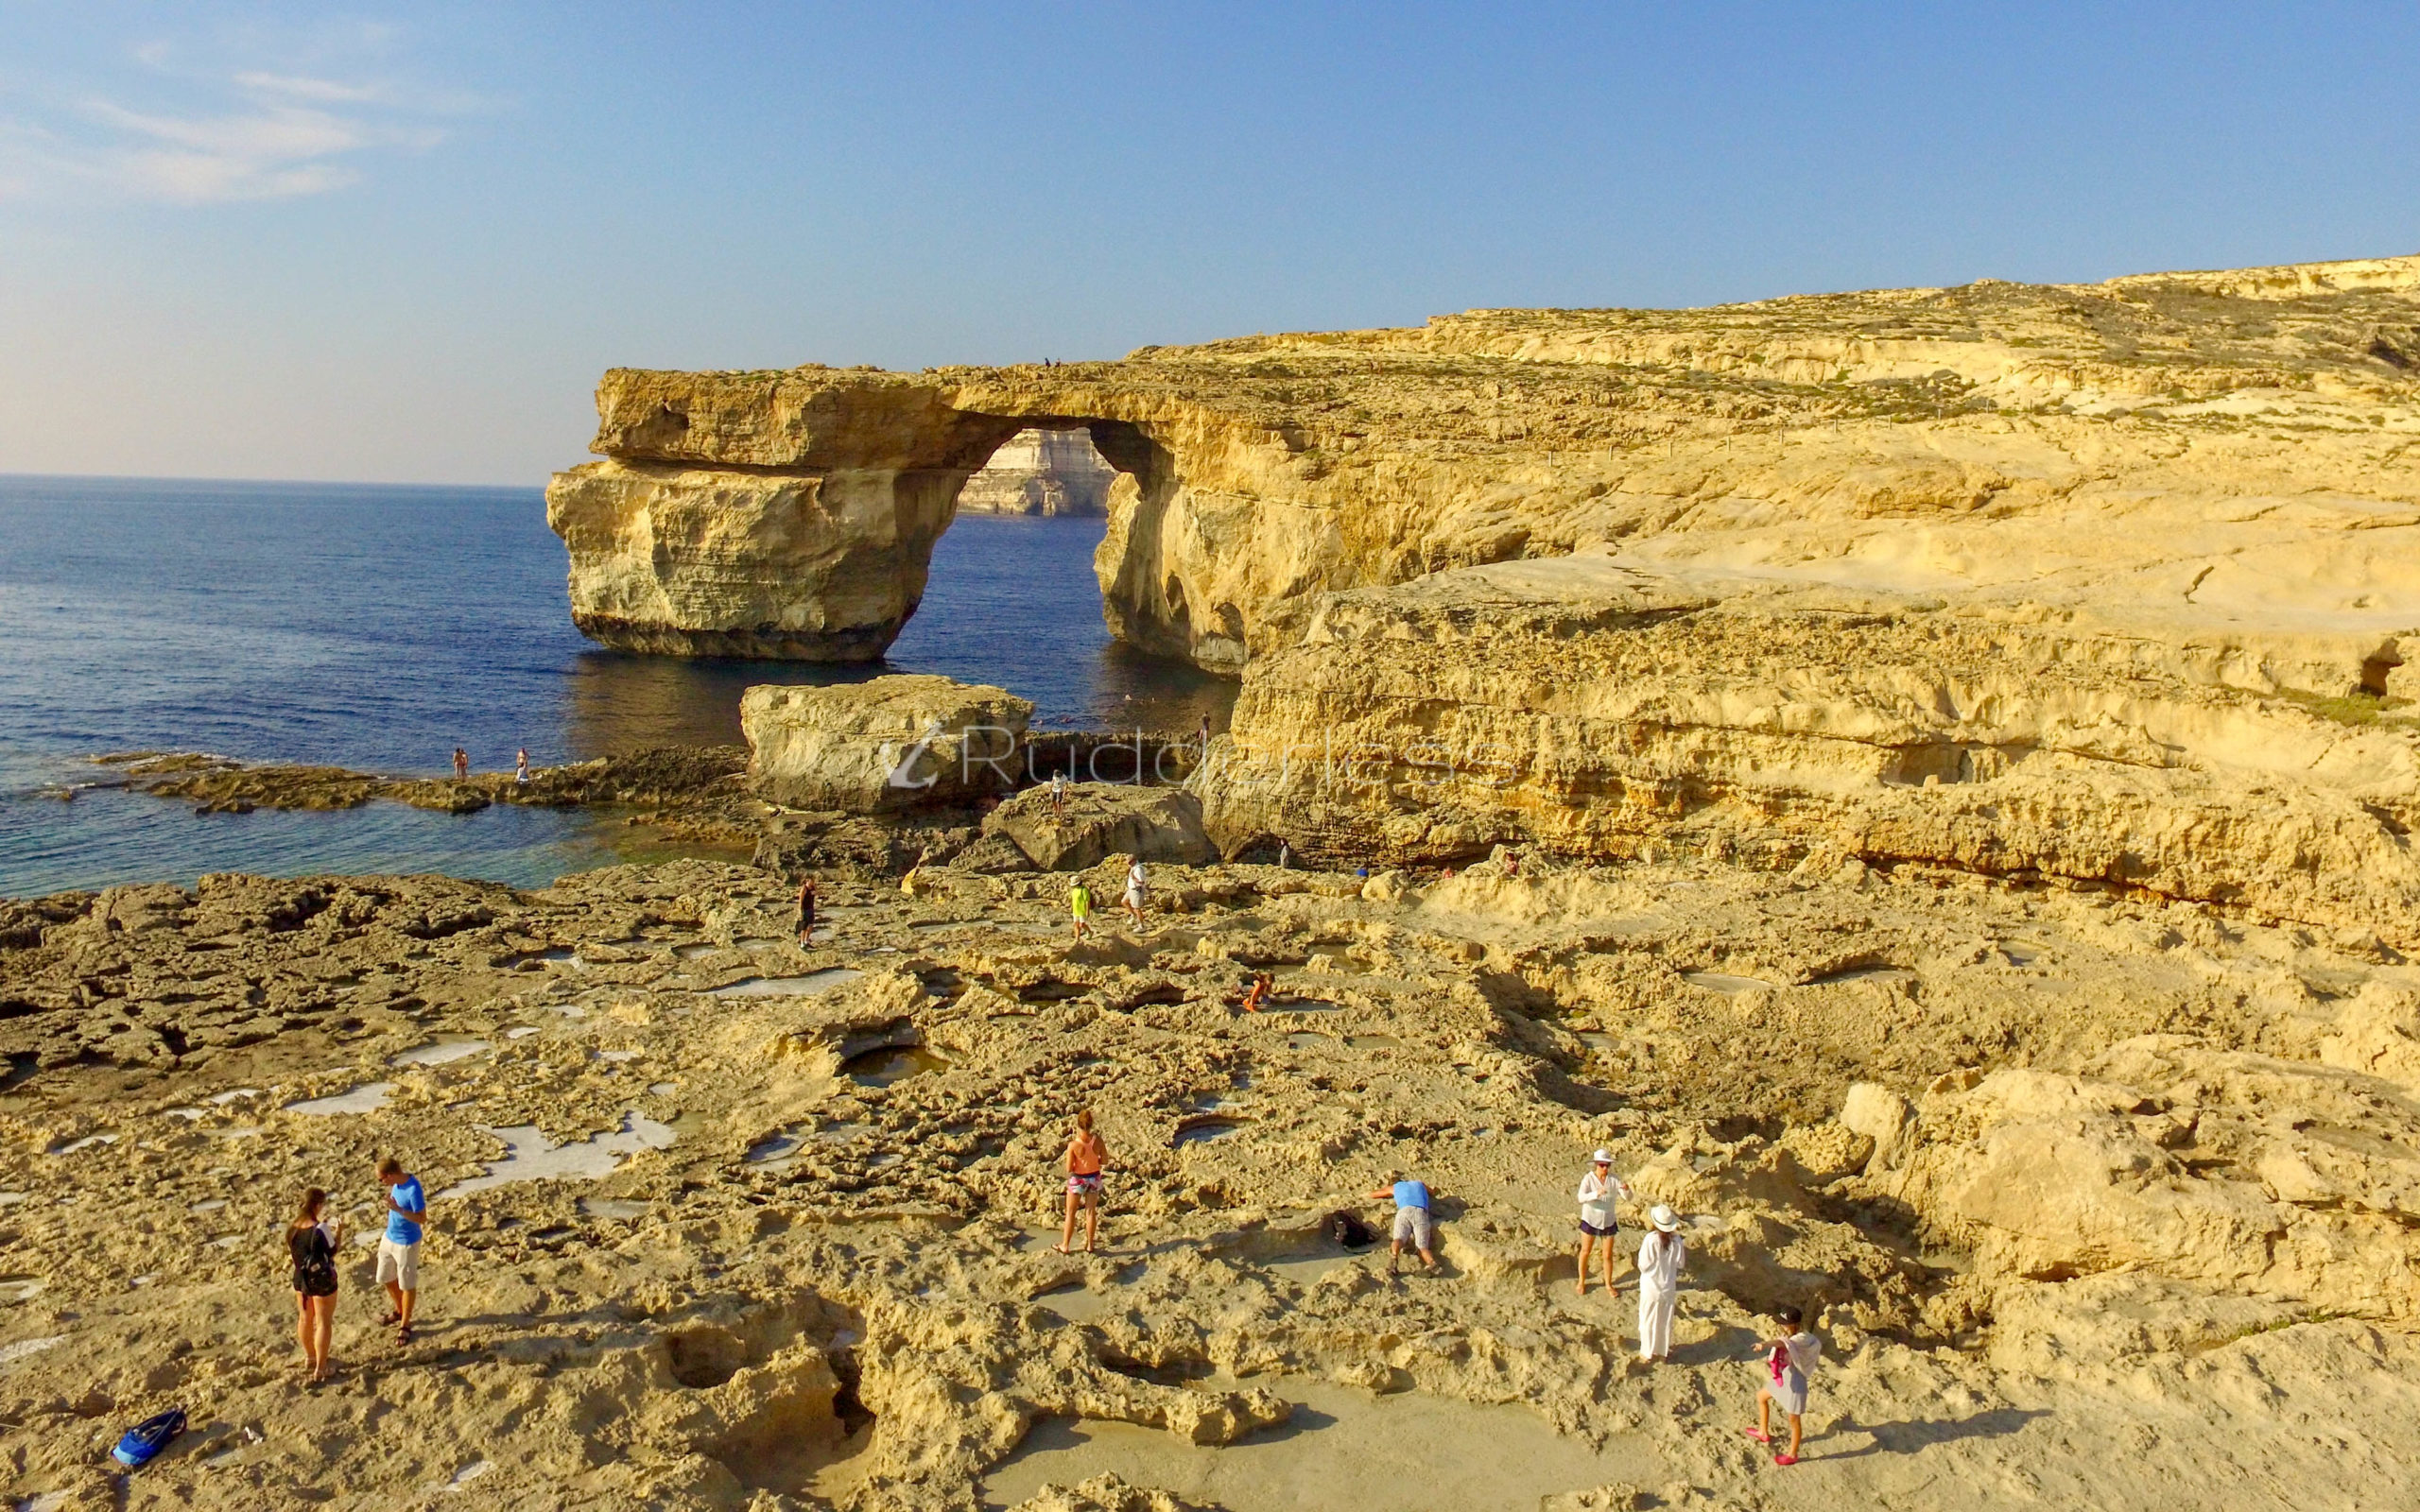 What to see in malta in 3 days